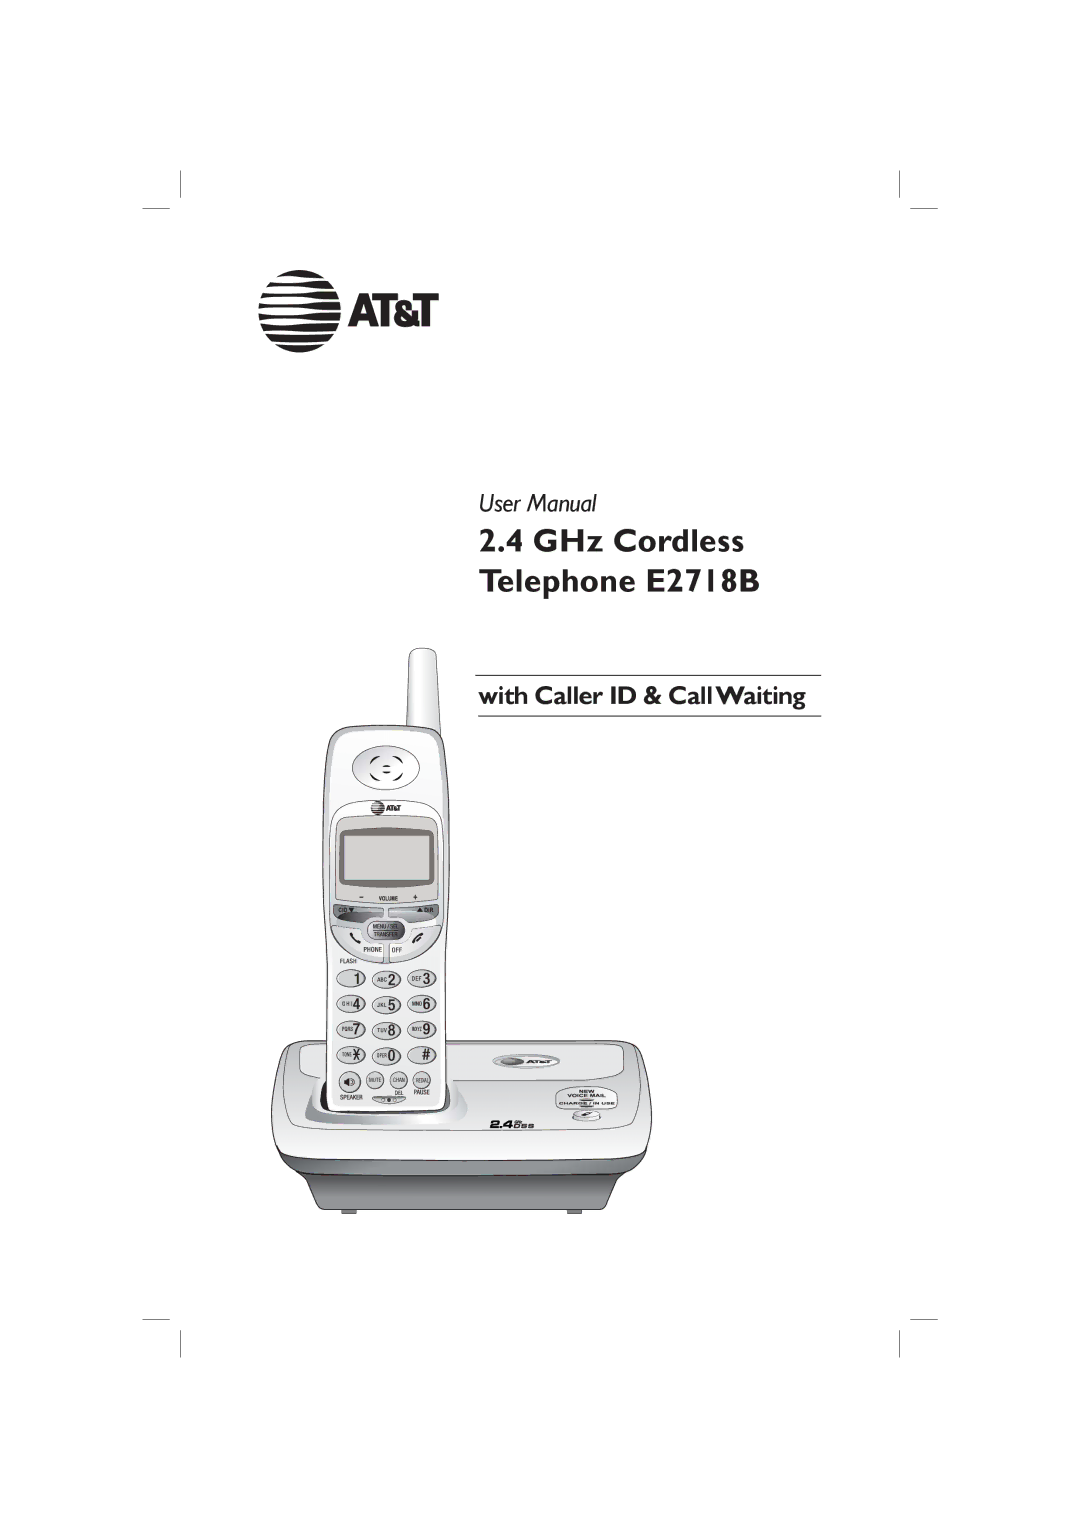 AT&T user manual GHz Cordless Telephone E2718B 